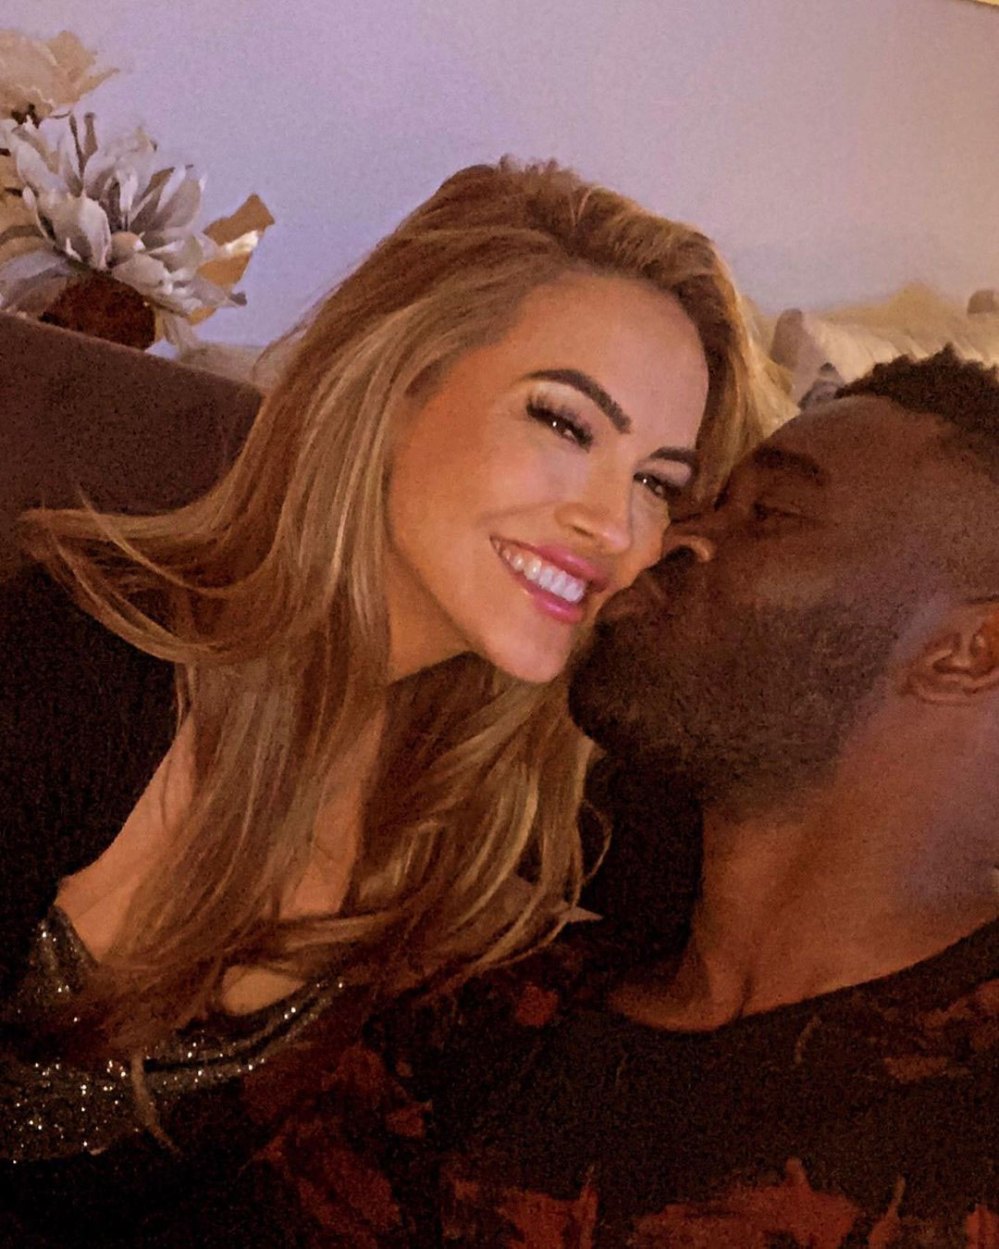 Chrishell Stause Reveals DWTS Keo Motsepe Pursued Her Before They Started Dating Instagram